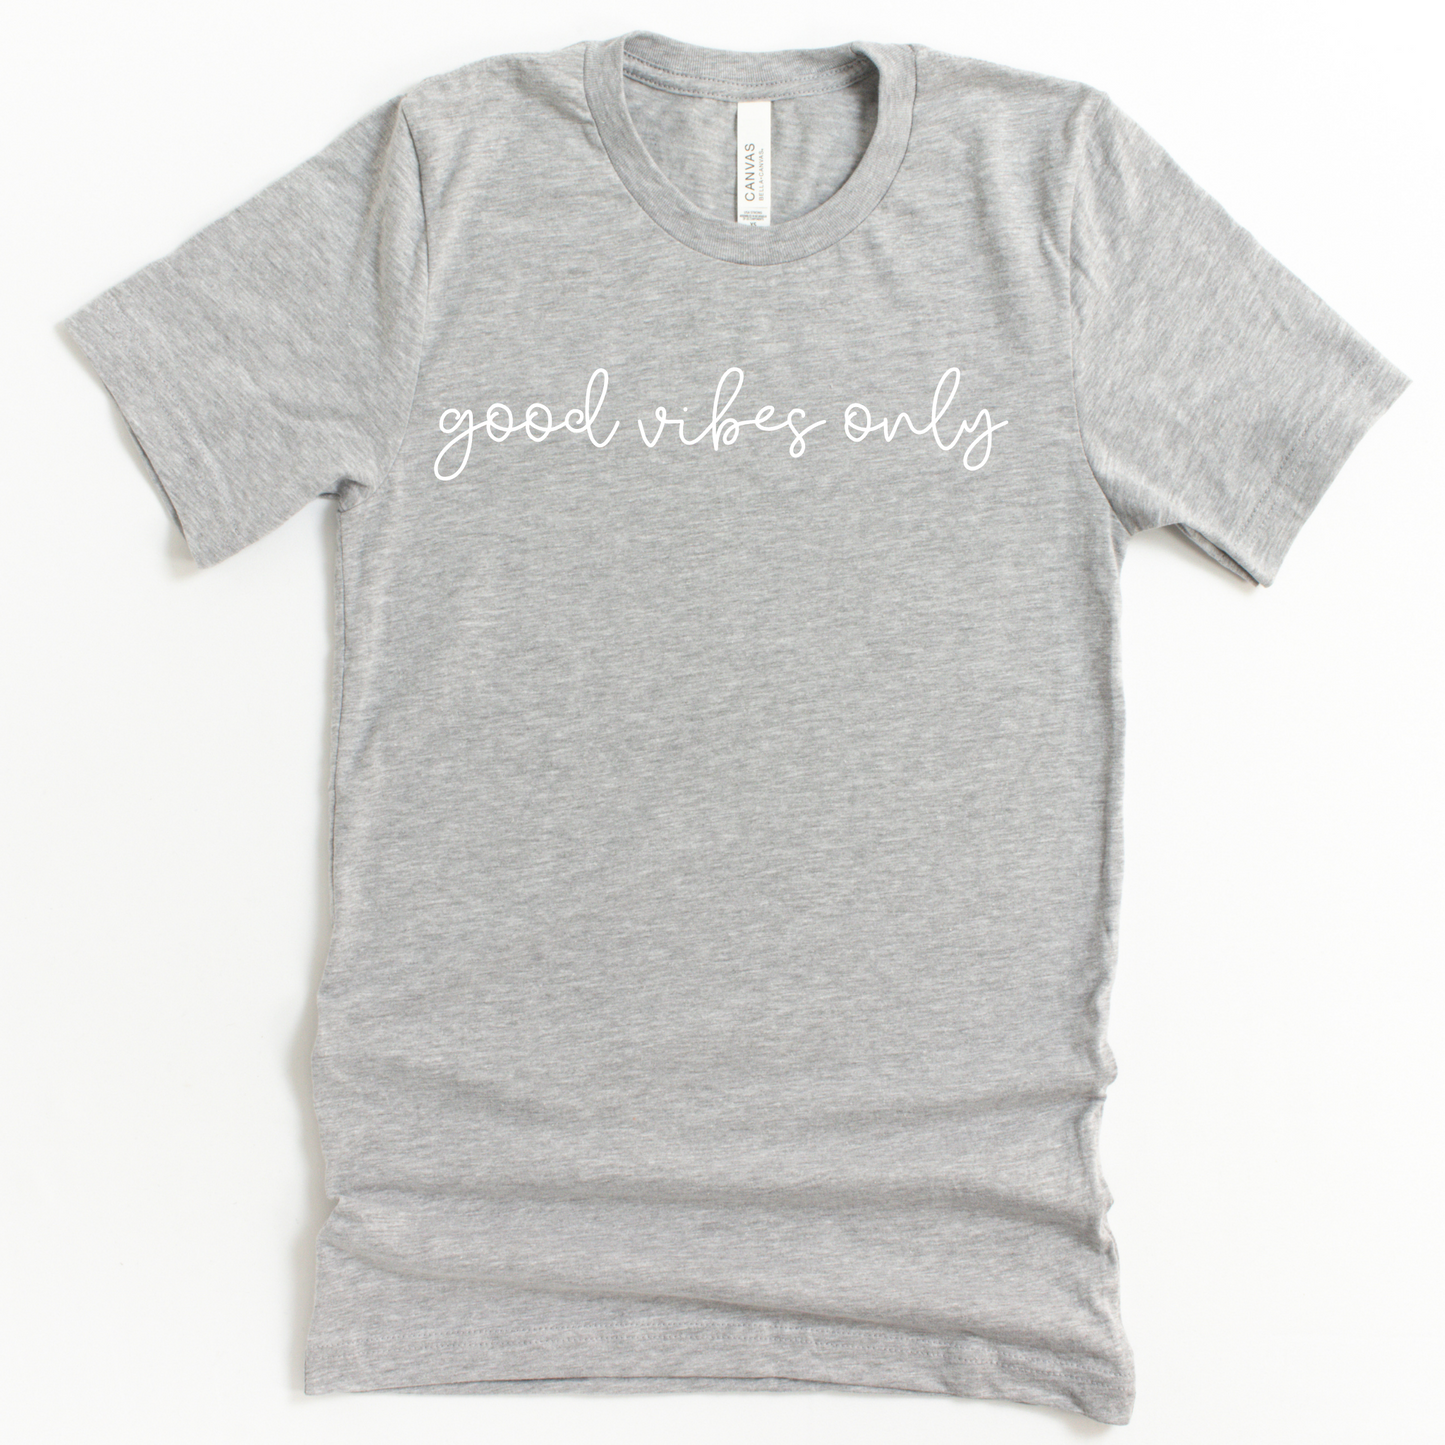 Good Vibes Only T-Shirt